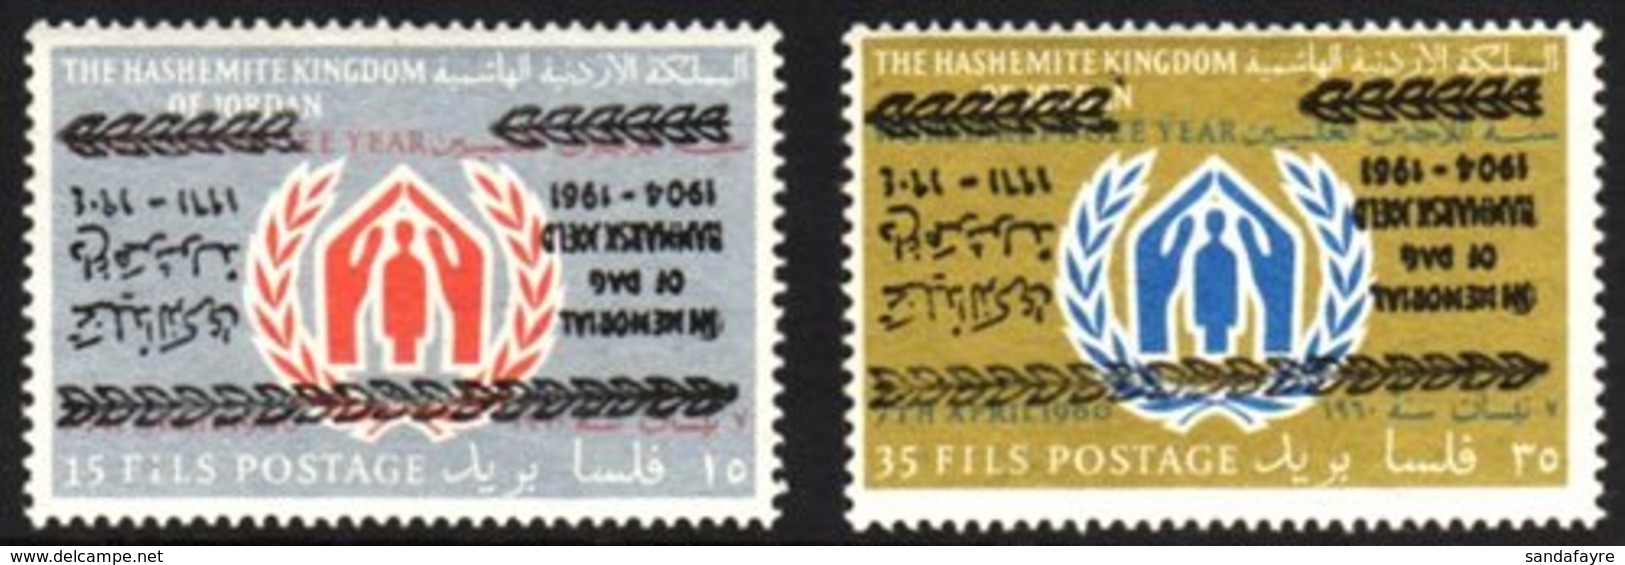 1961 Dag Hammarskjold 15f And 35f, Each With Inverted Overprints SG 505a And 506a, Fine Never Hinged Mint. (2) For More  - Giordania